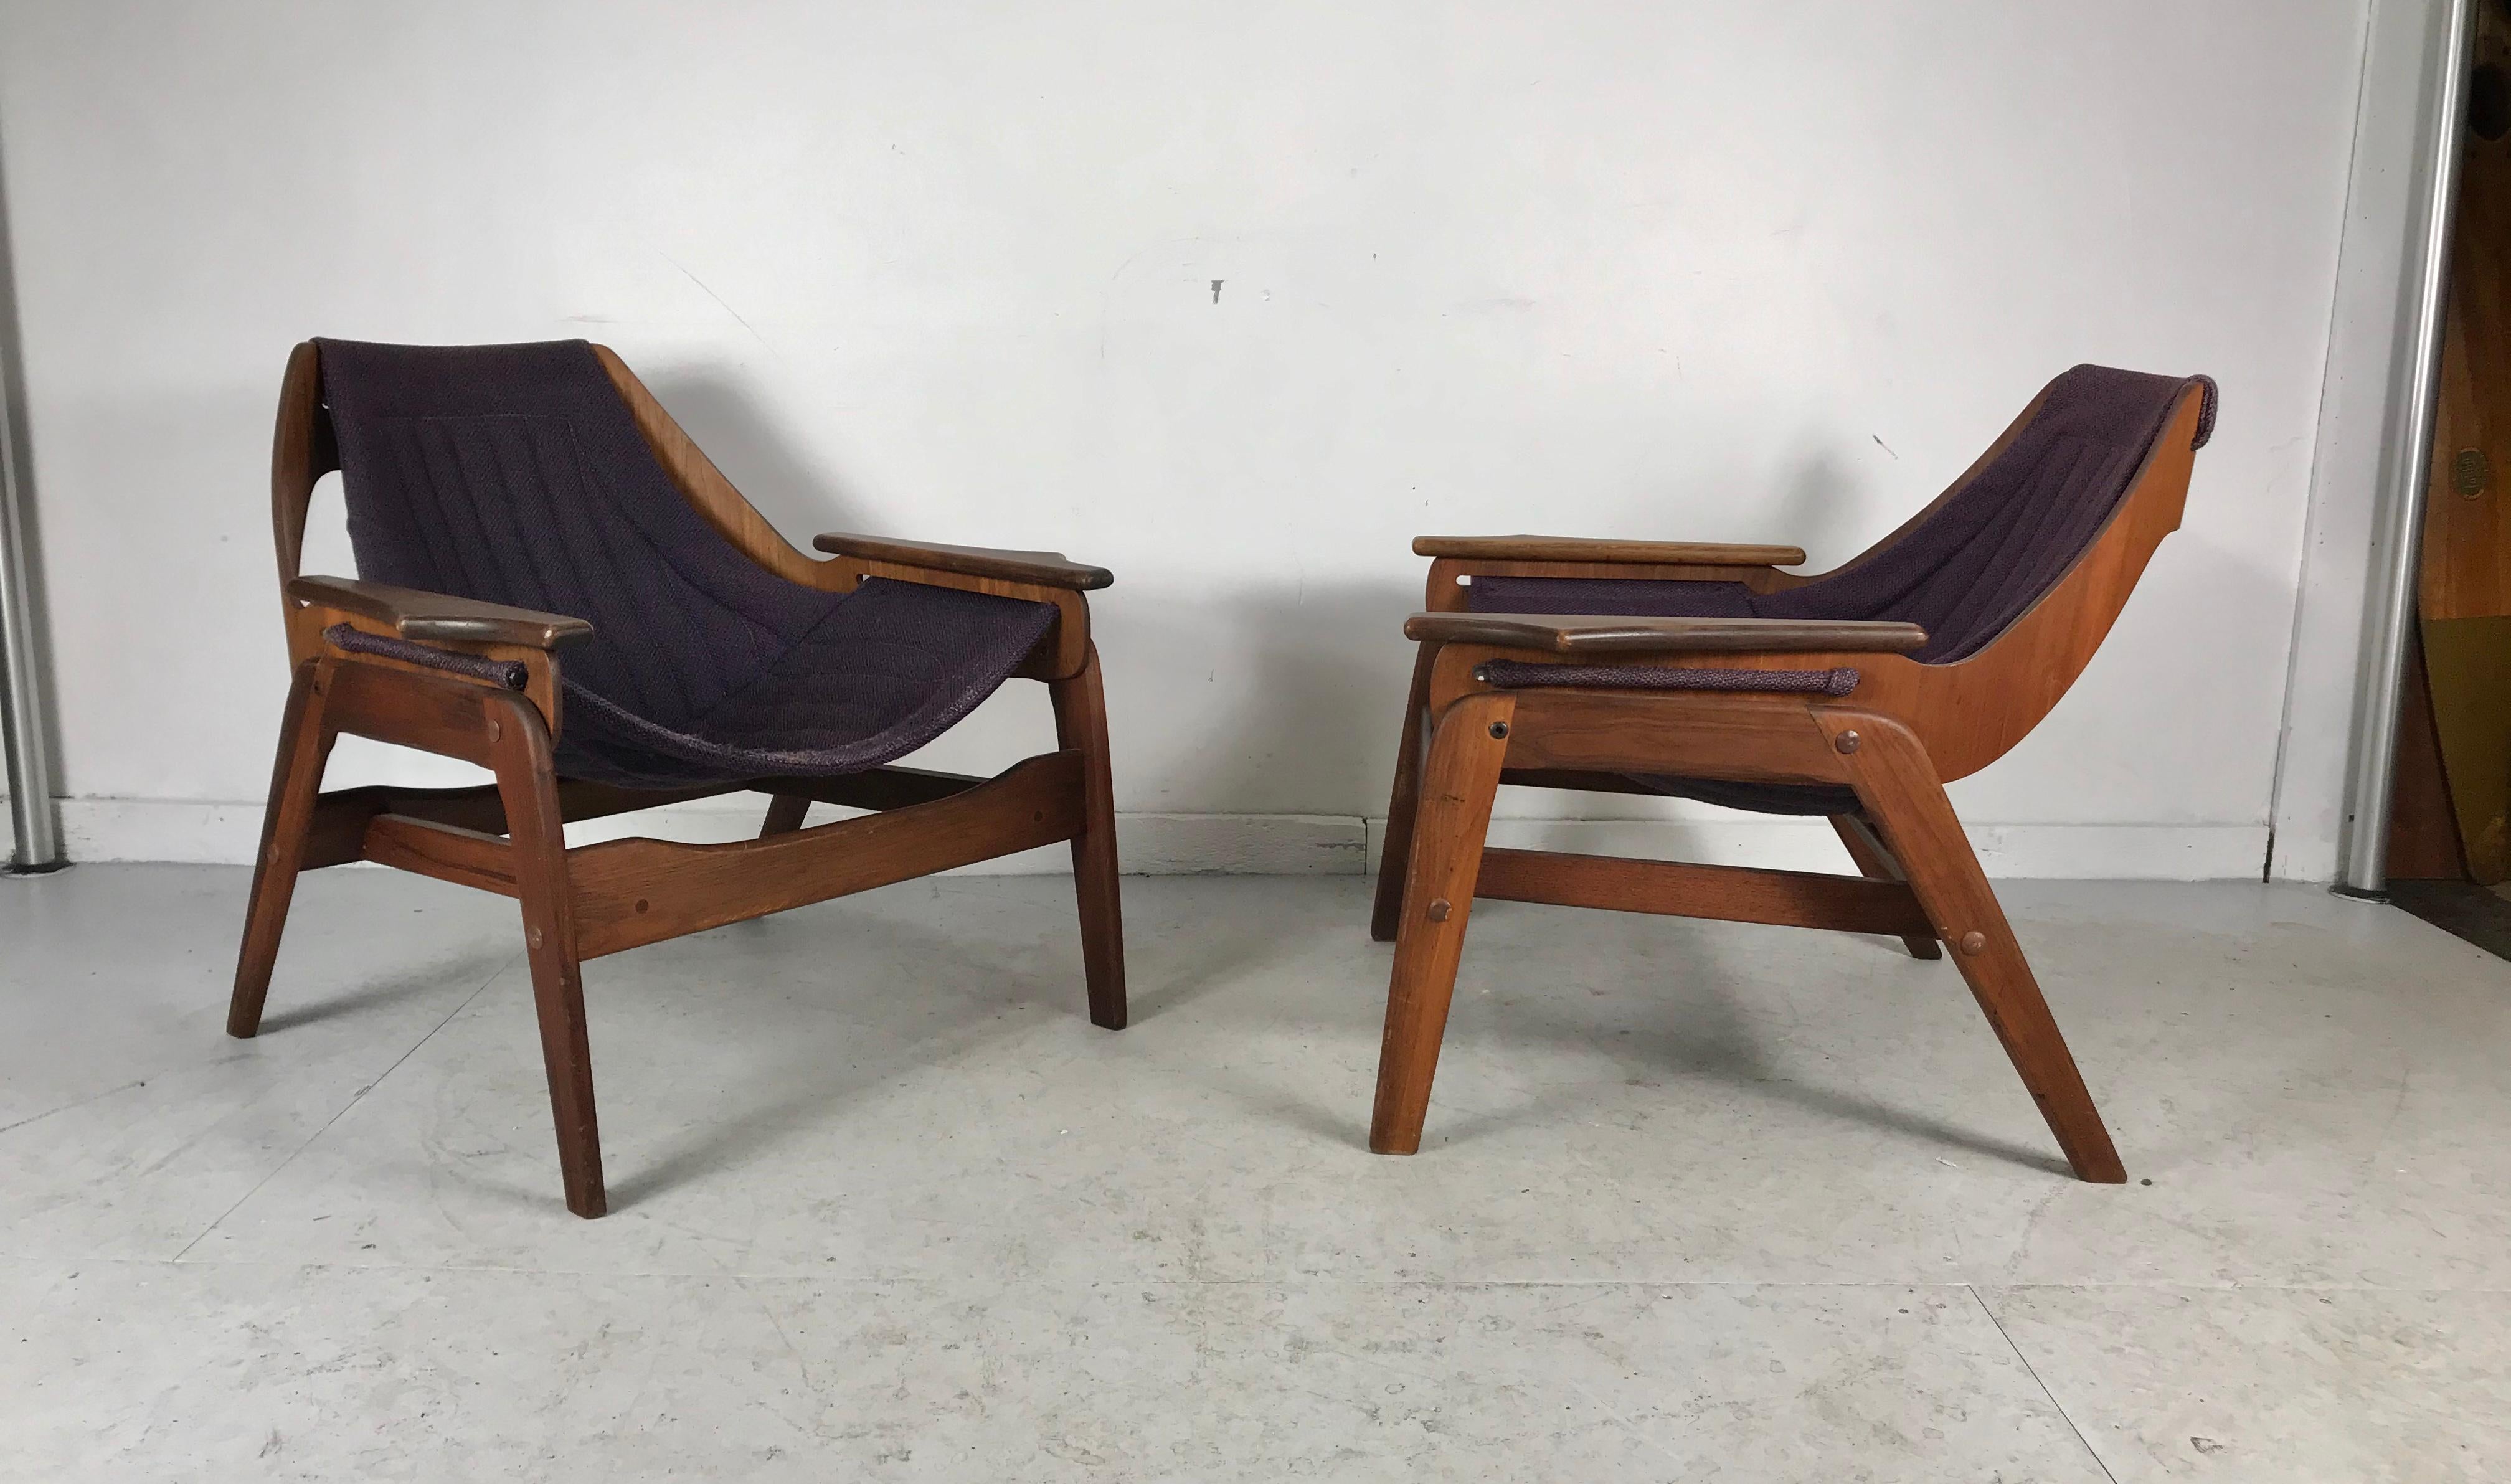 Mid-20th Century Mid-Century Modern Triumph I Sling Chairs by Jerry Johnson for Charlton